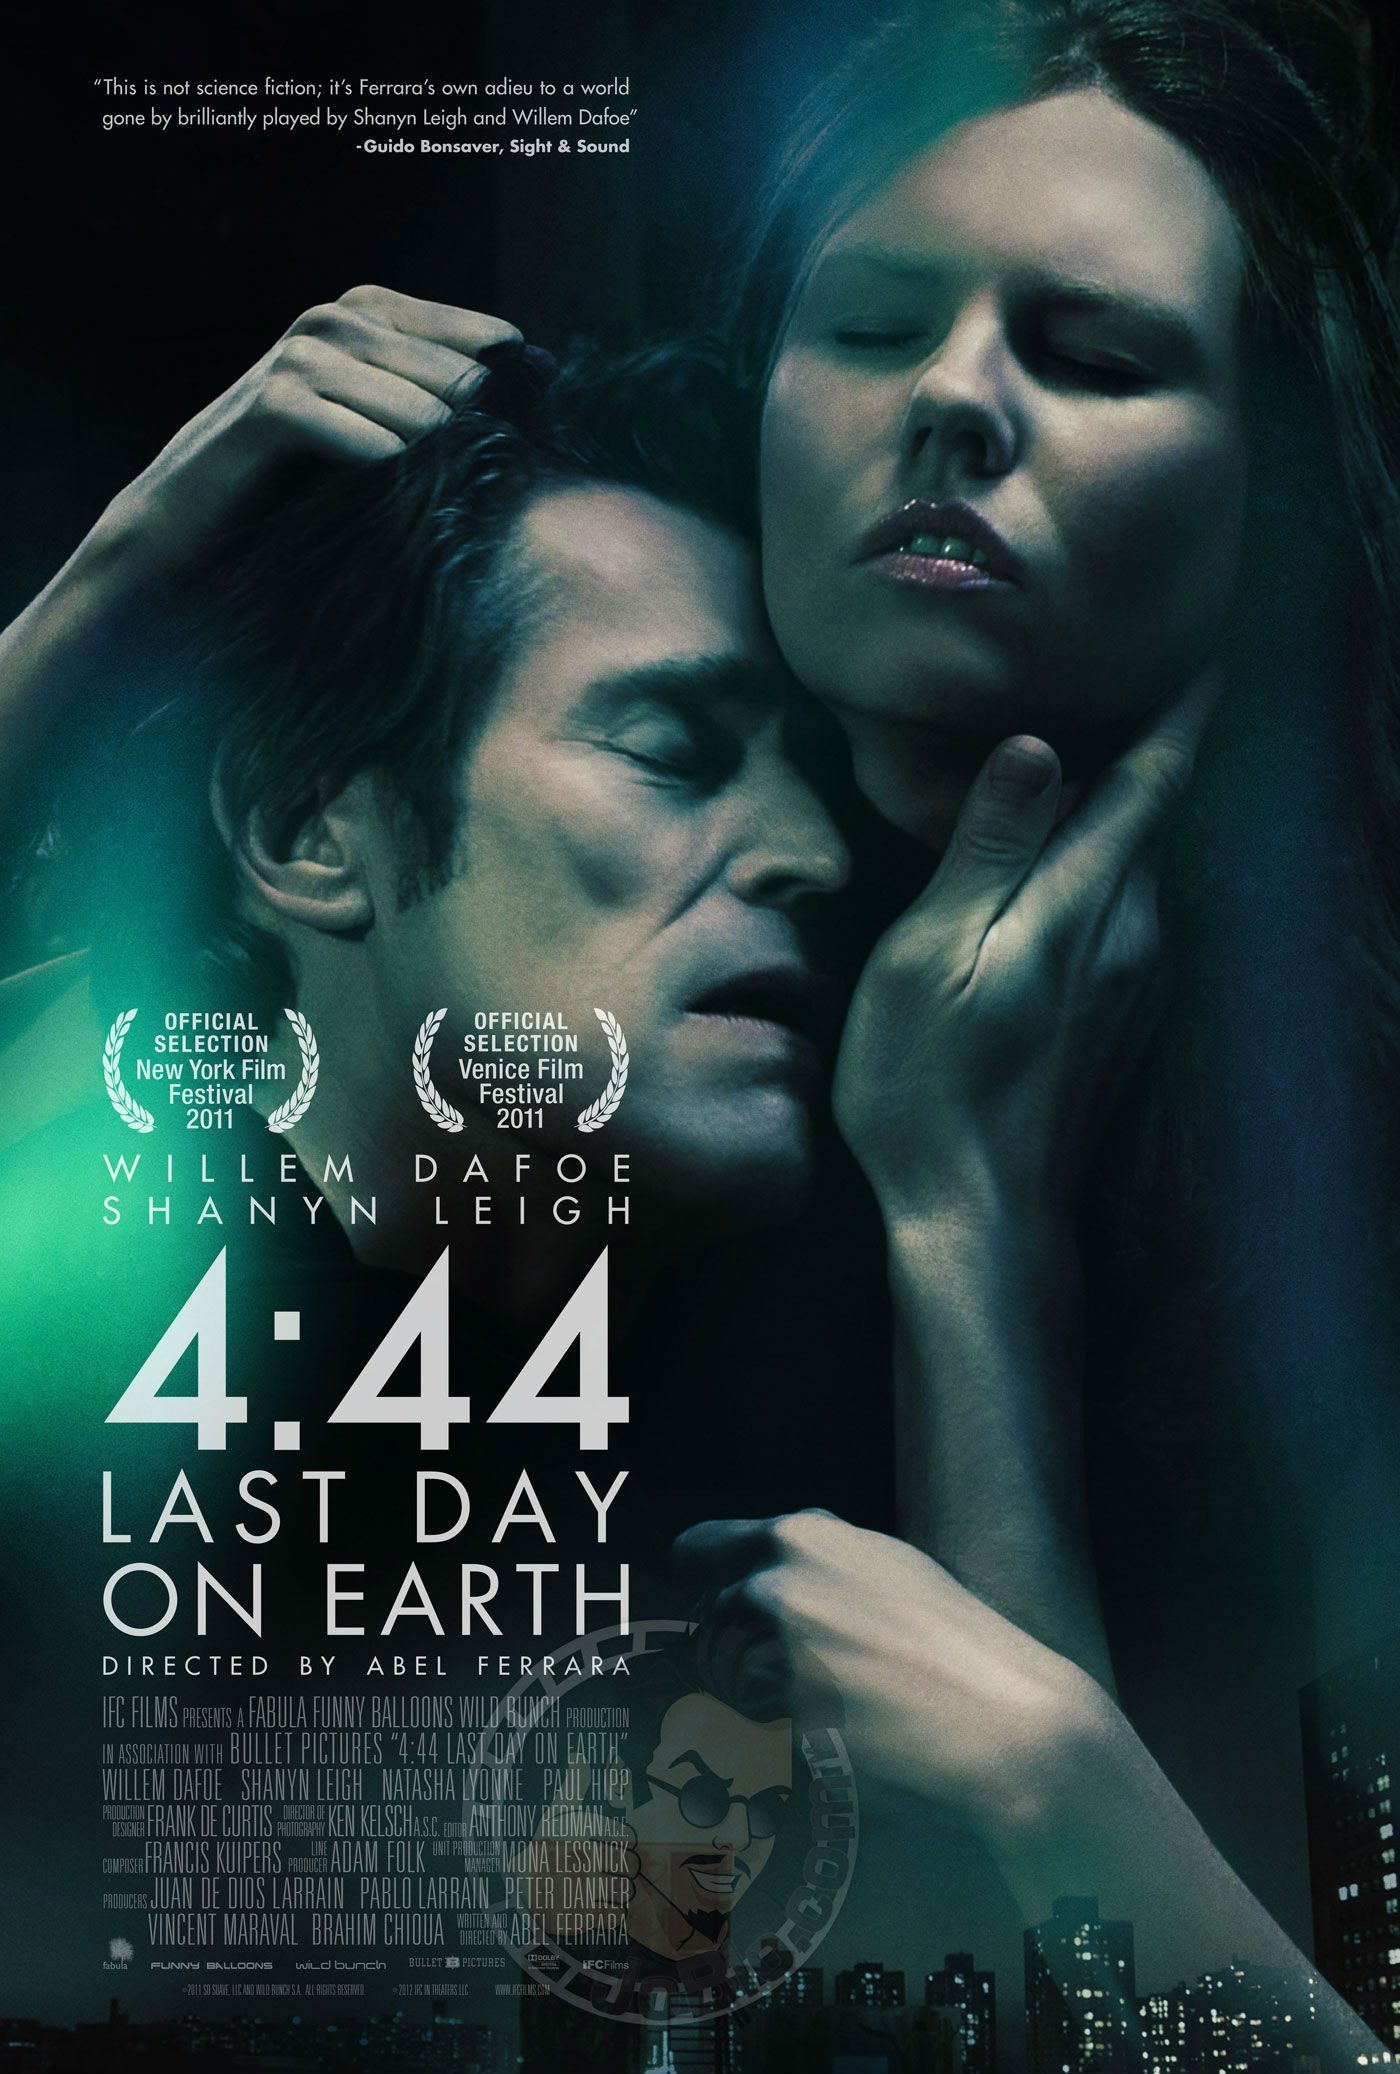 4:44 Last Day on Earth Available on DVD/Blu-ray July 17th